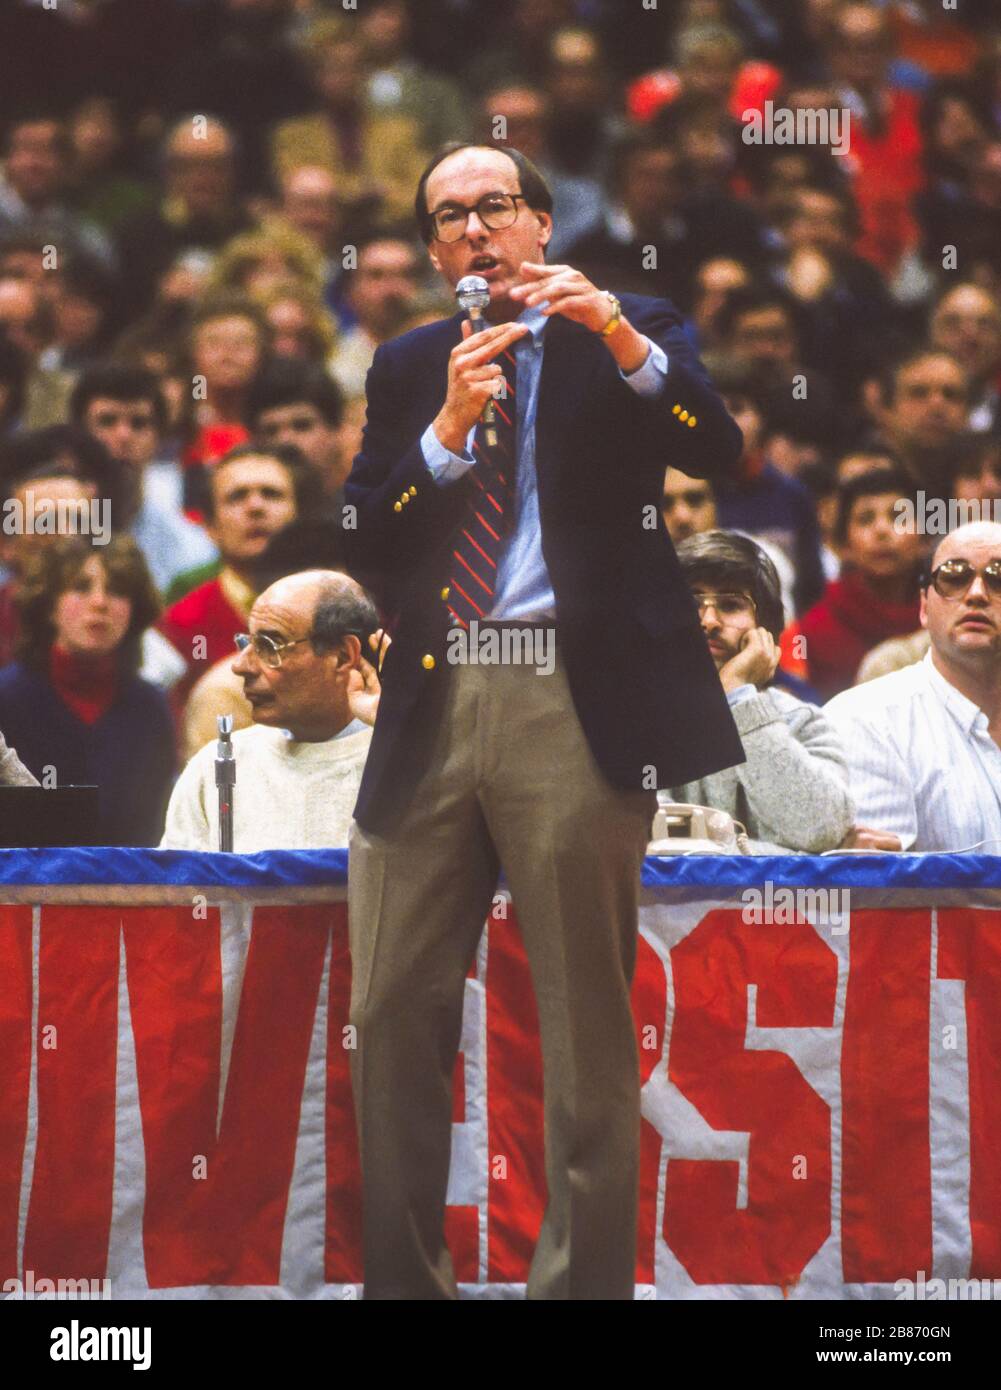 SYRACUSE, NEW YORK, USA, 1985 - Syracuse University basketball Coach Jim Boeheim takes microphone to warn crowd not to throw objects on court during Georgetown game 1/28/85. Stock Photo